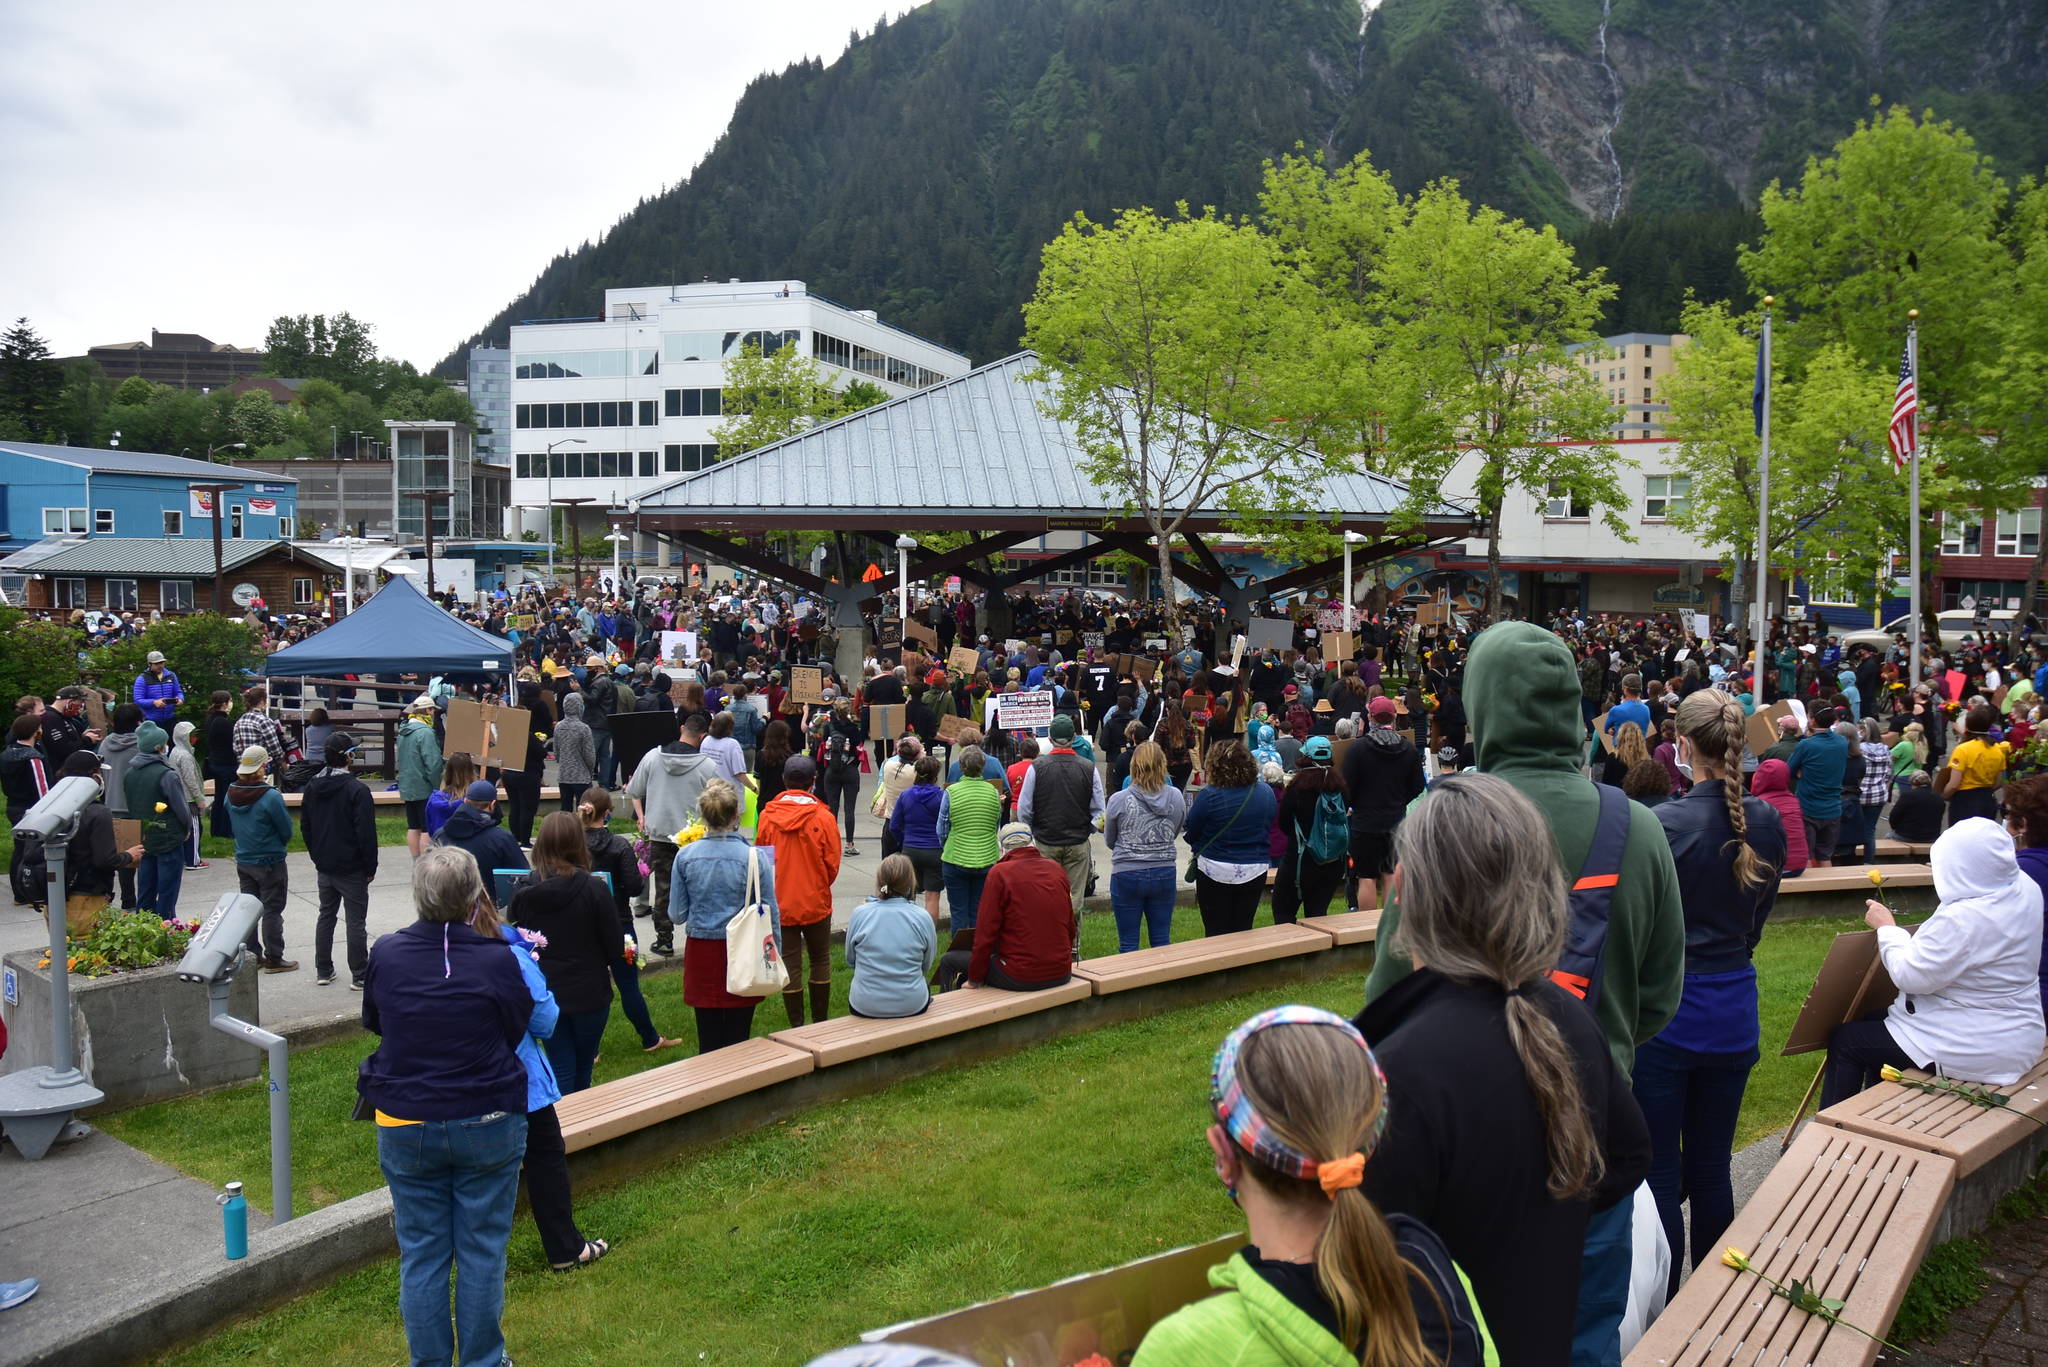 Peter Segall / Juneau Empire File 
Hundreds gathered at Marine Park in downtown Juneau on June 7, 2020, for a rally and march calling for an end to police violence and systemic racism in America. On Thursday, Juneau’s newly formed Systemic Racism Review Committee held its first meeting.